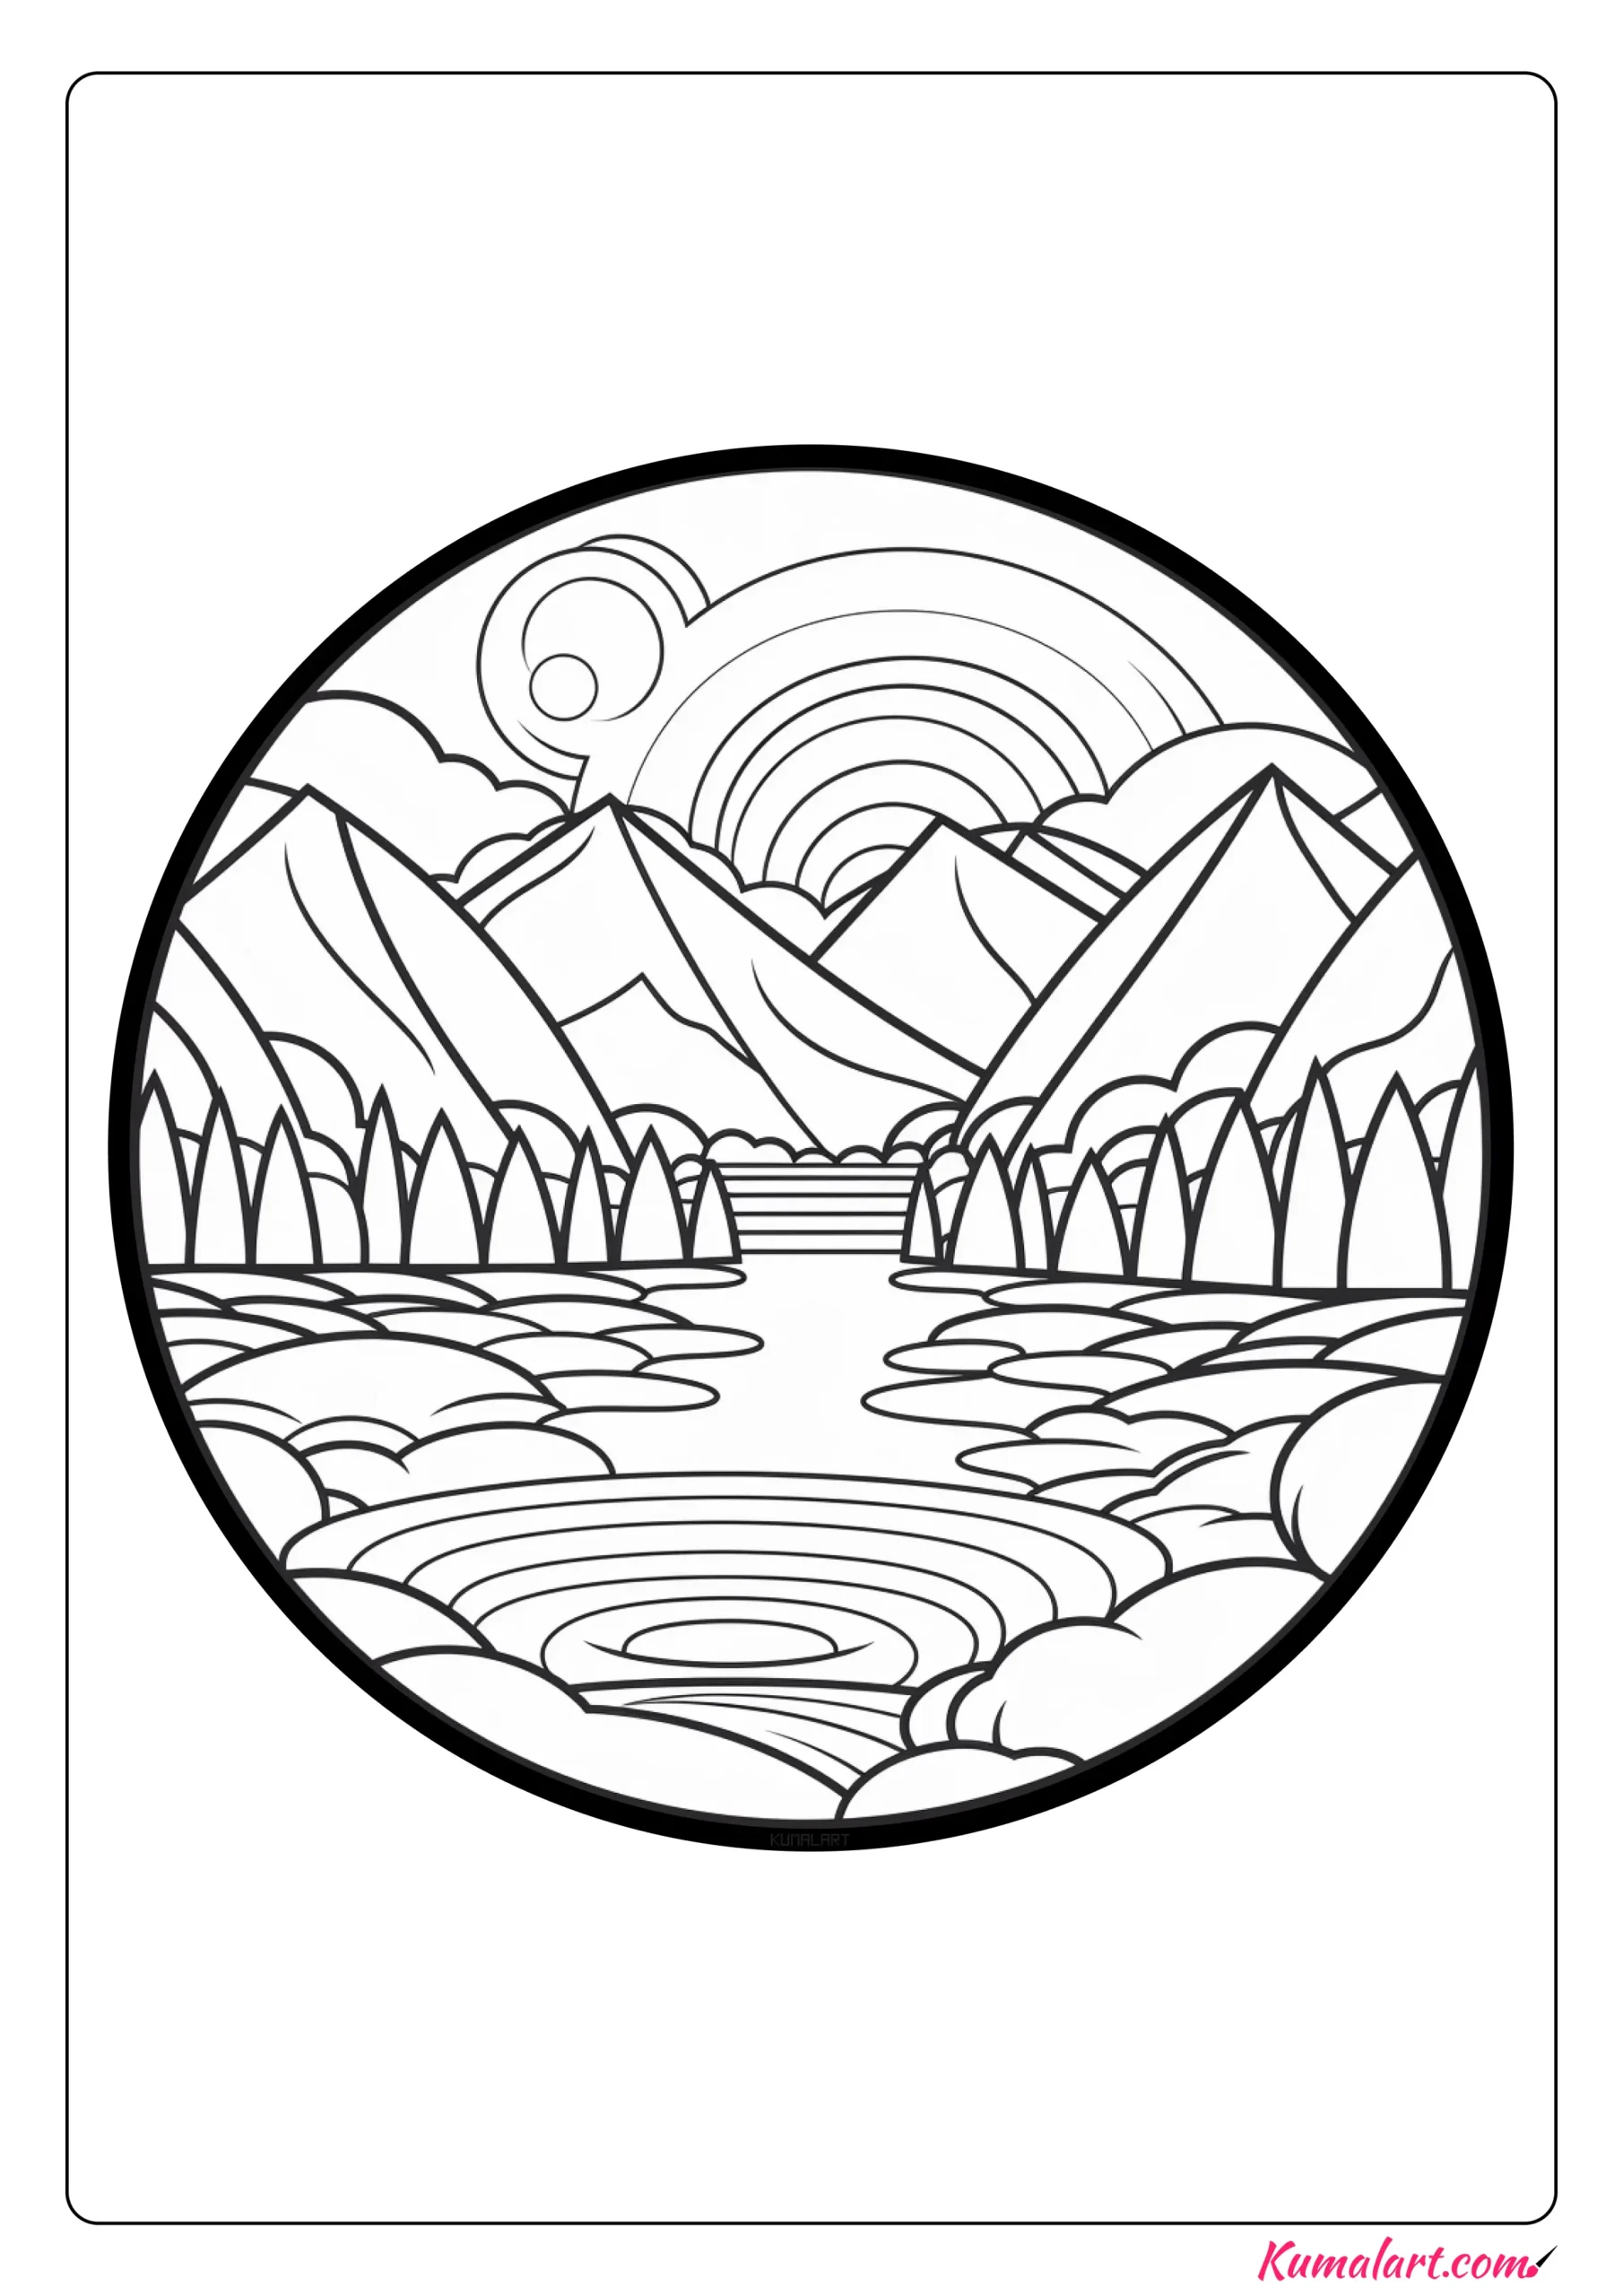 Endless River Coloring Page